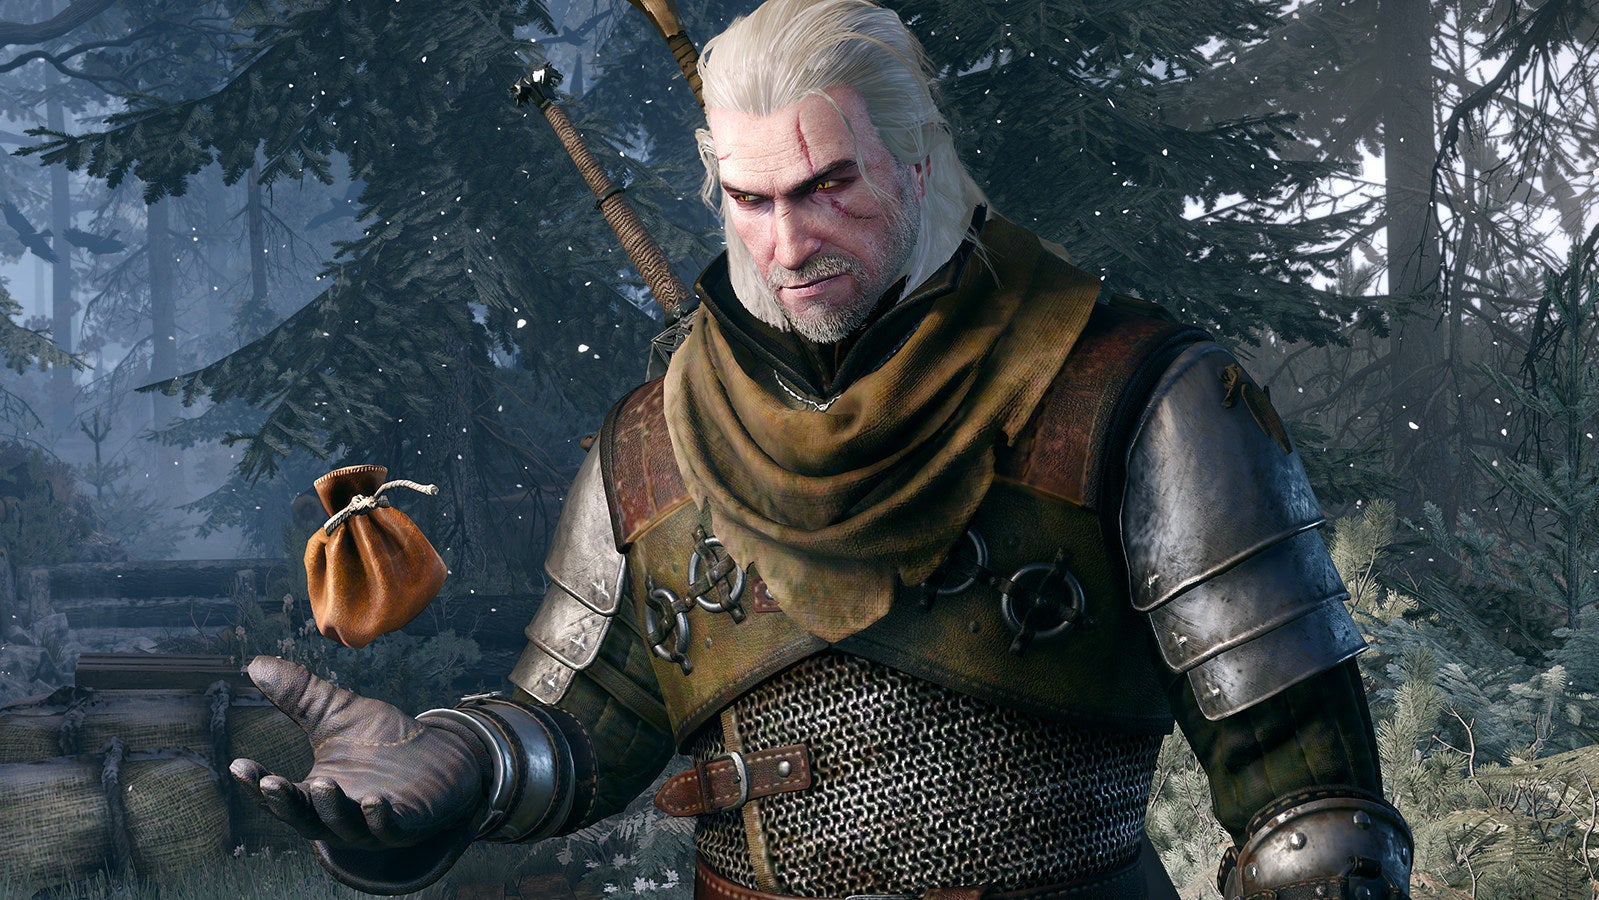 The Witcher 3 next-gen update tested: worse performance, even without ray tracing